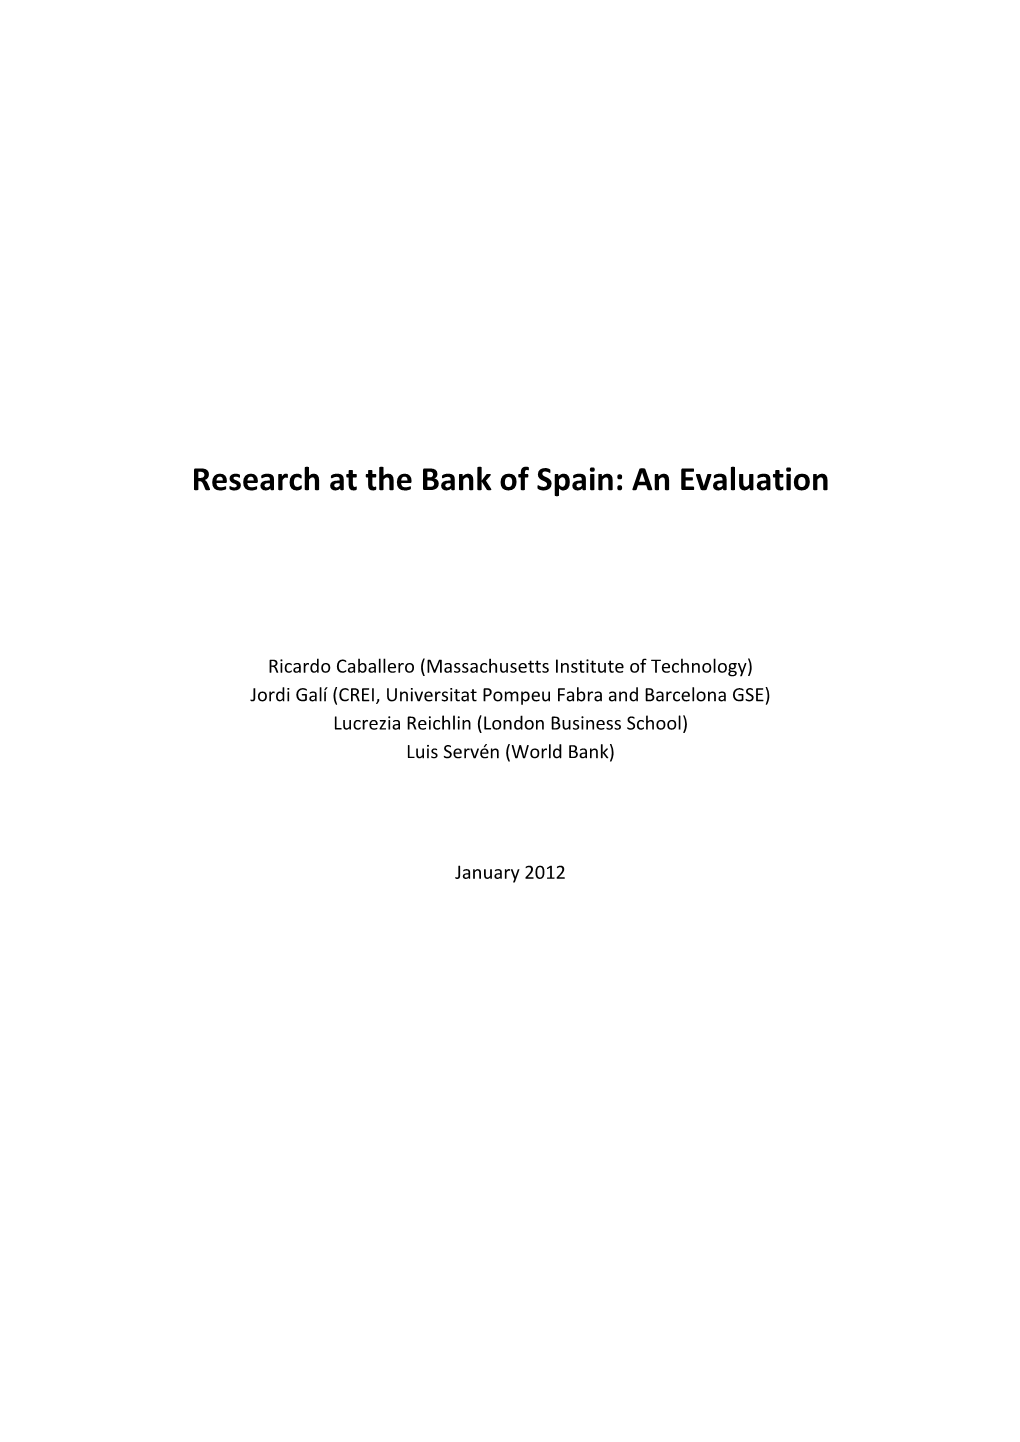 Research at the Bank of Spain: an Evaluation